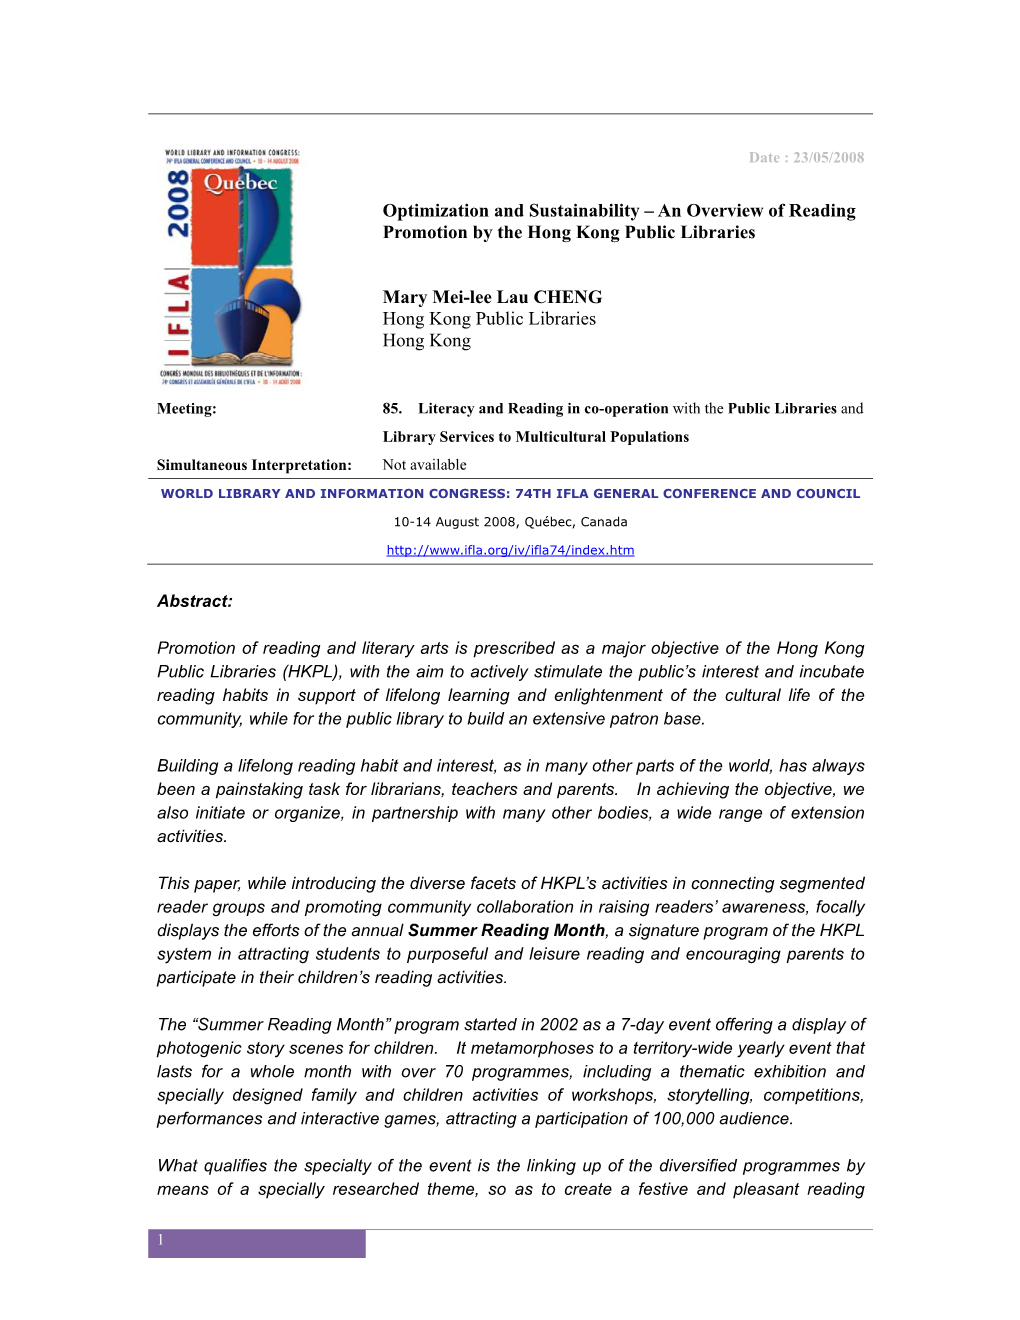 Optimization and Sustainability – an Overview of Reading Promotion by the Hong Kong Public Libraries